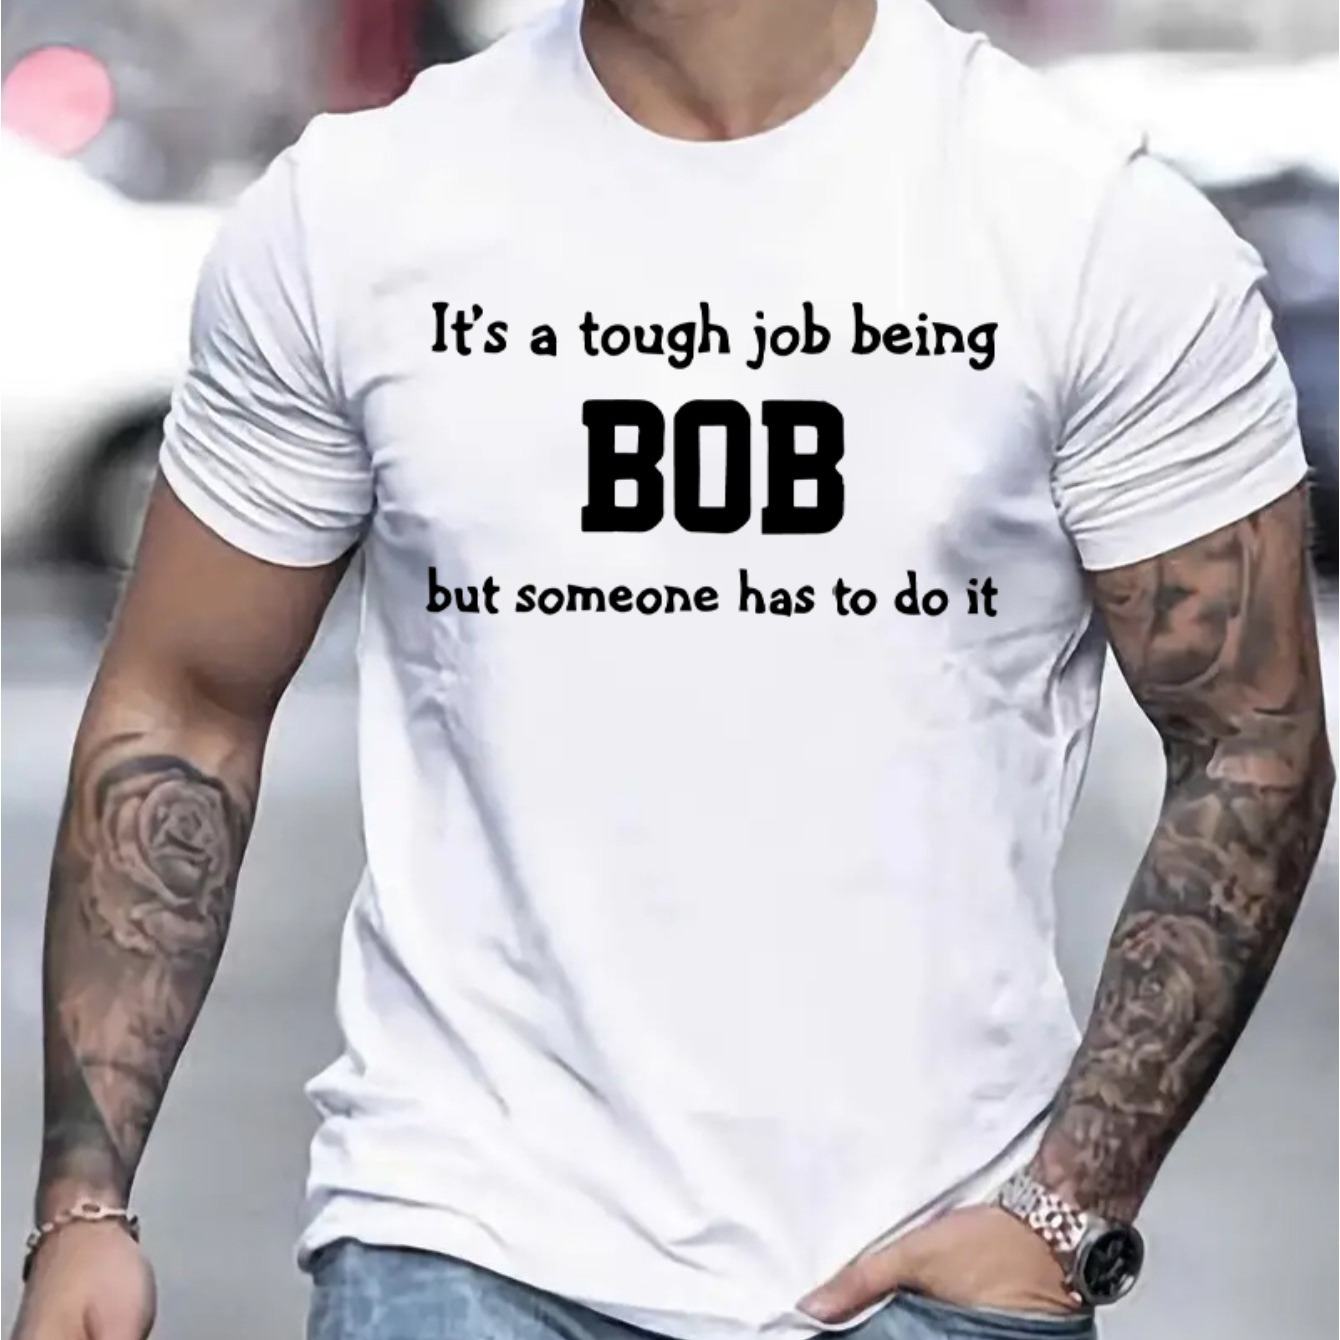 

It's A Tough Job Being Bob But Someone Has To Do It Print, Men's Novel Graphic Design T-shirt, Casual Comfy Tees For Summer, Men's Clothing Tops For Daily Activities